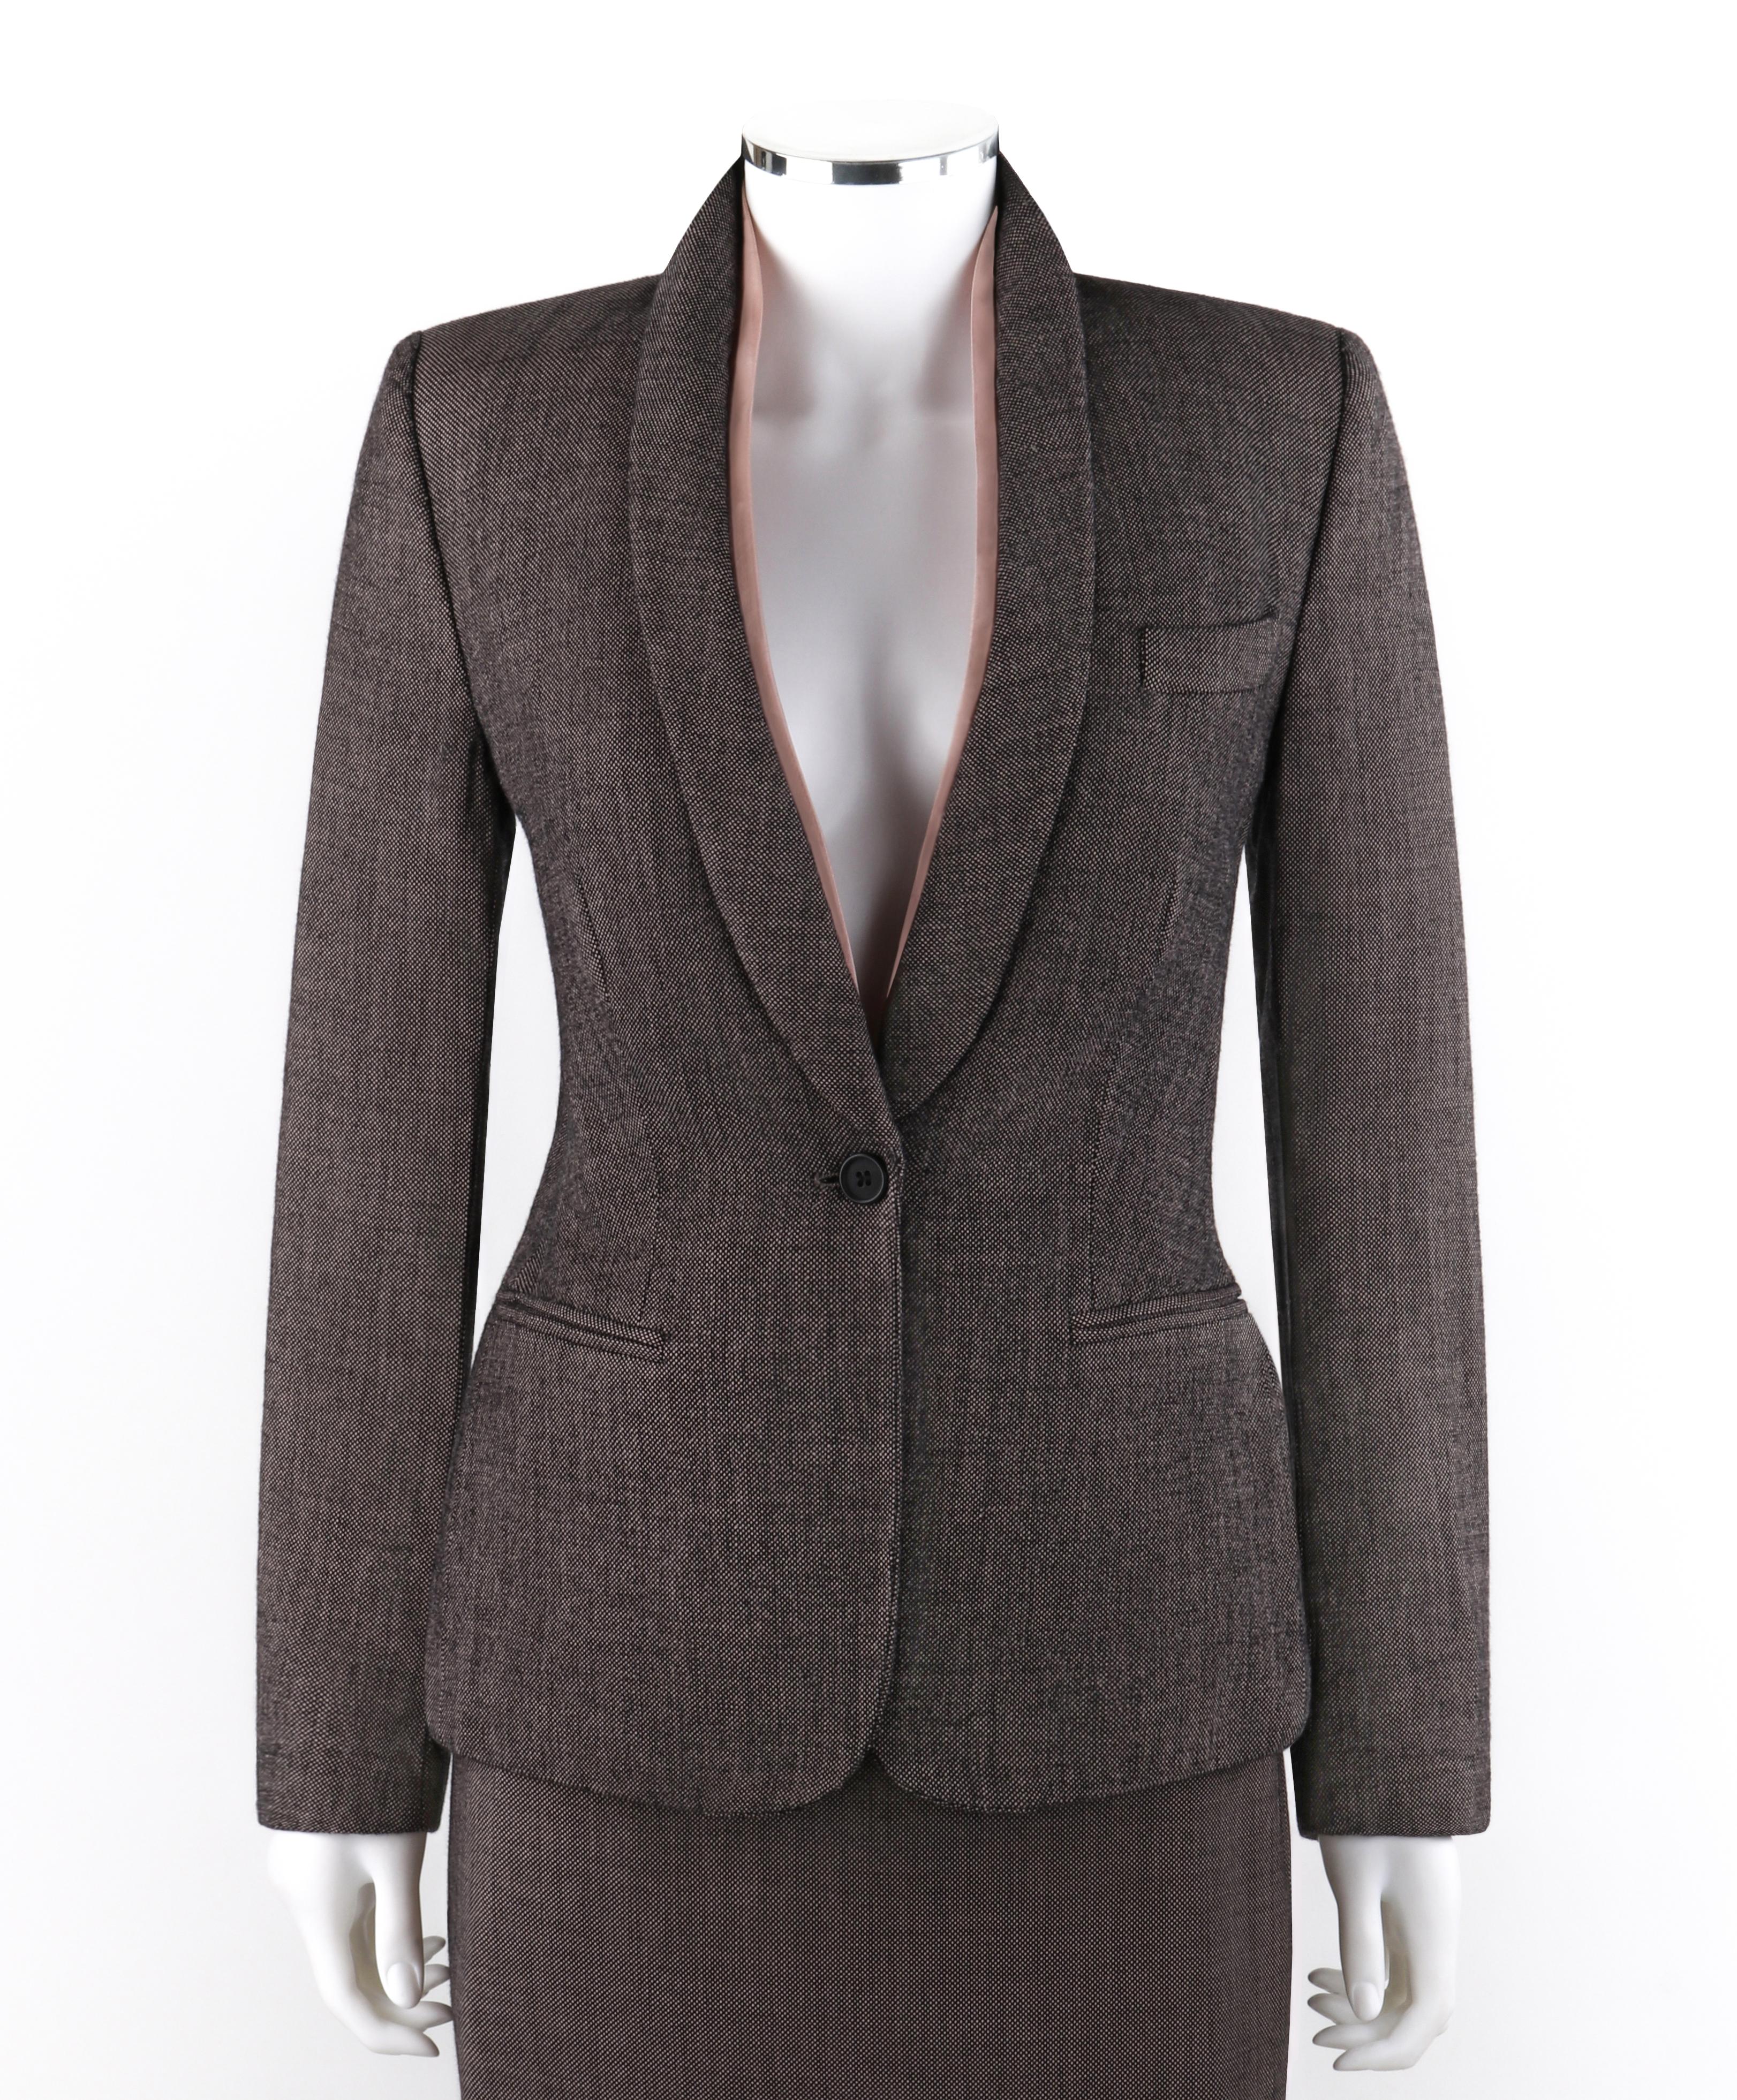  ALEXANDER McQUEEN A/W 1998 “Joan” 2 pc. Removable Collar Blazer Skirt Suit Set

Brand / Manufacturer: Alexander McQueen
Collection: A/W 1998 “Joan”
Designer: Alexander McQueen
Style: Single button blazer jacket with removable collar; sheath